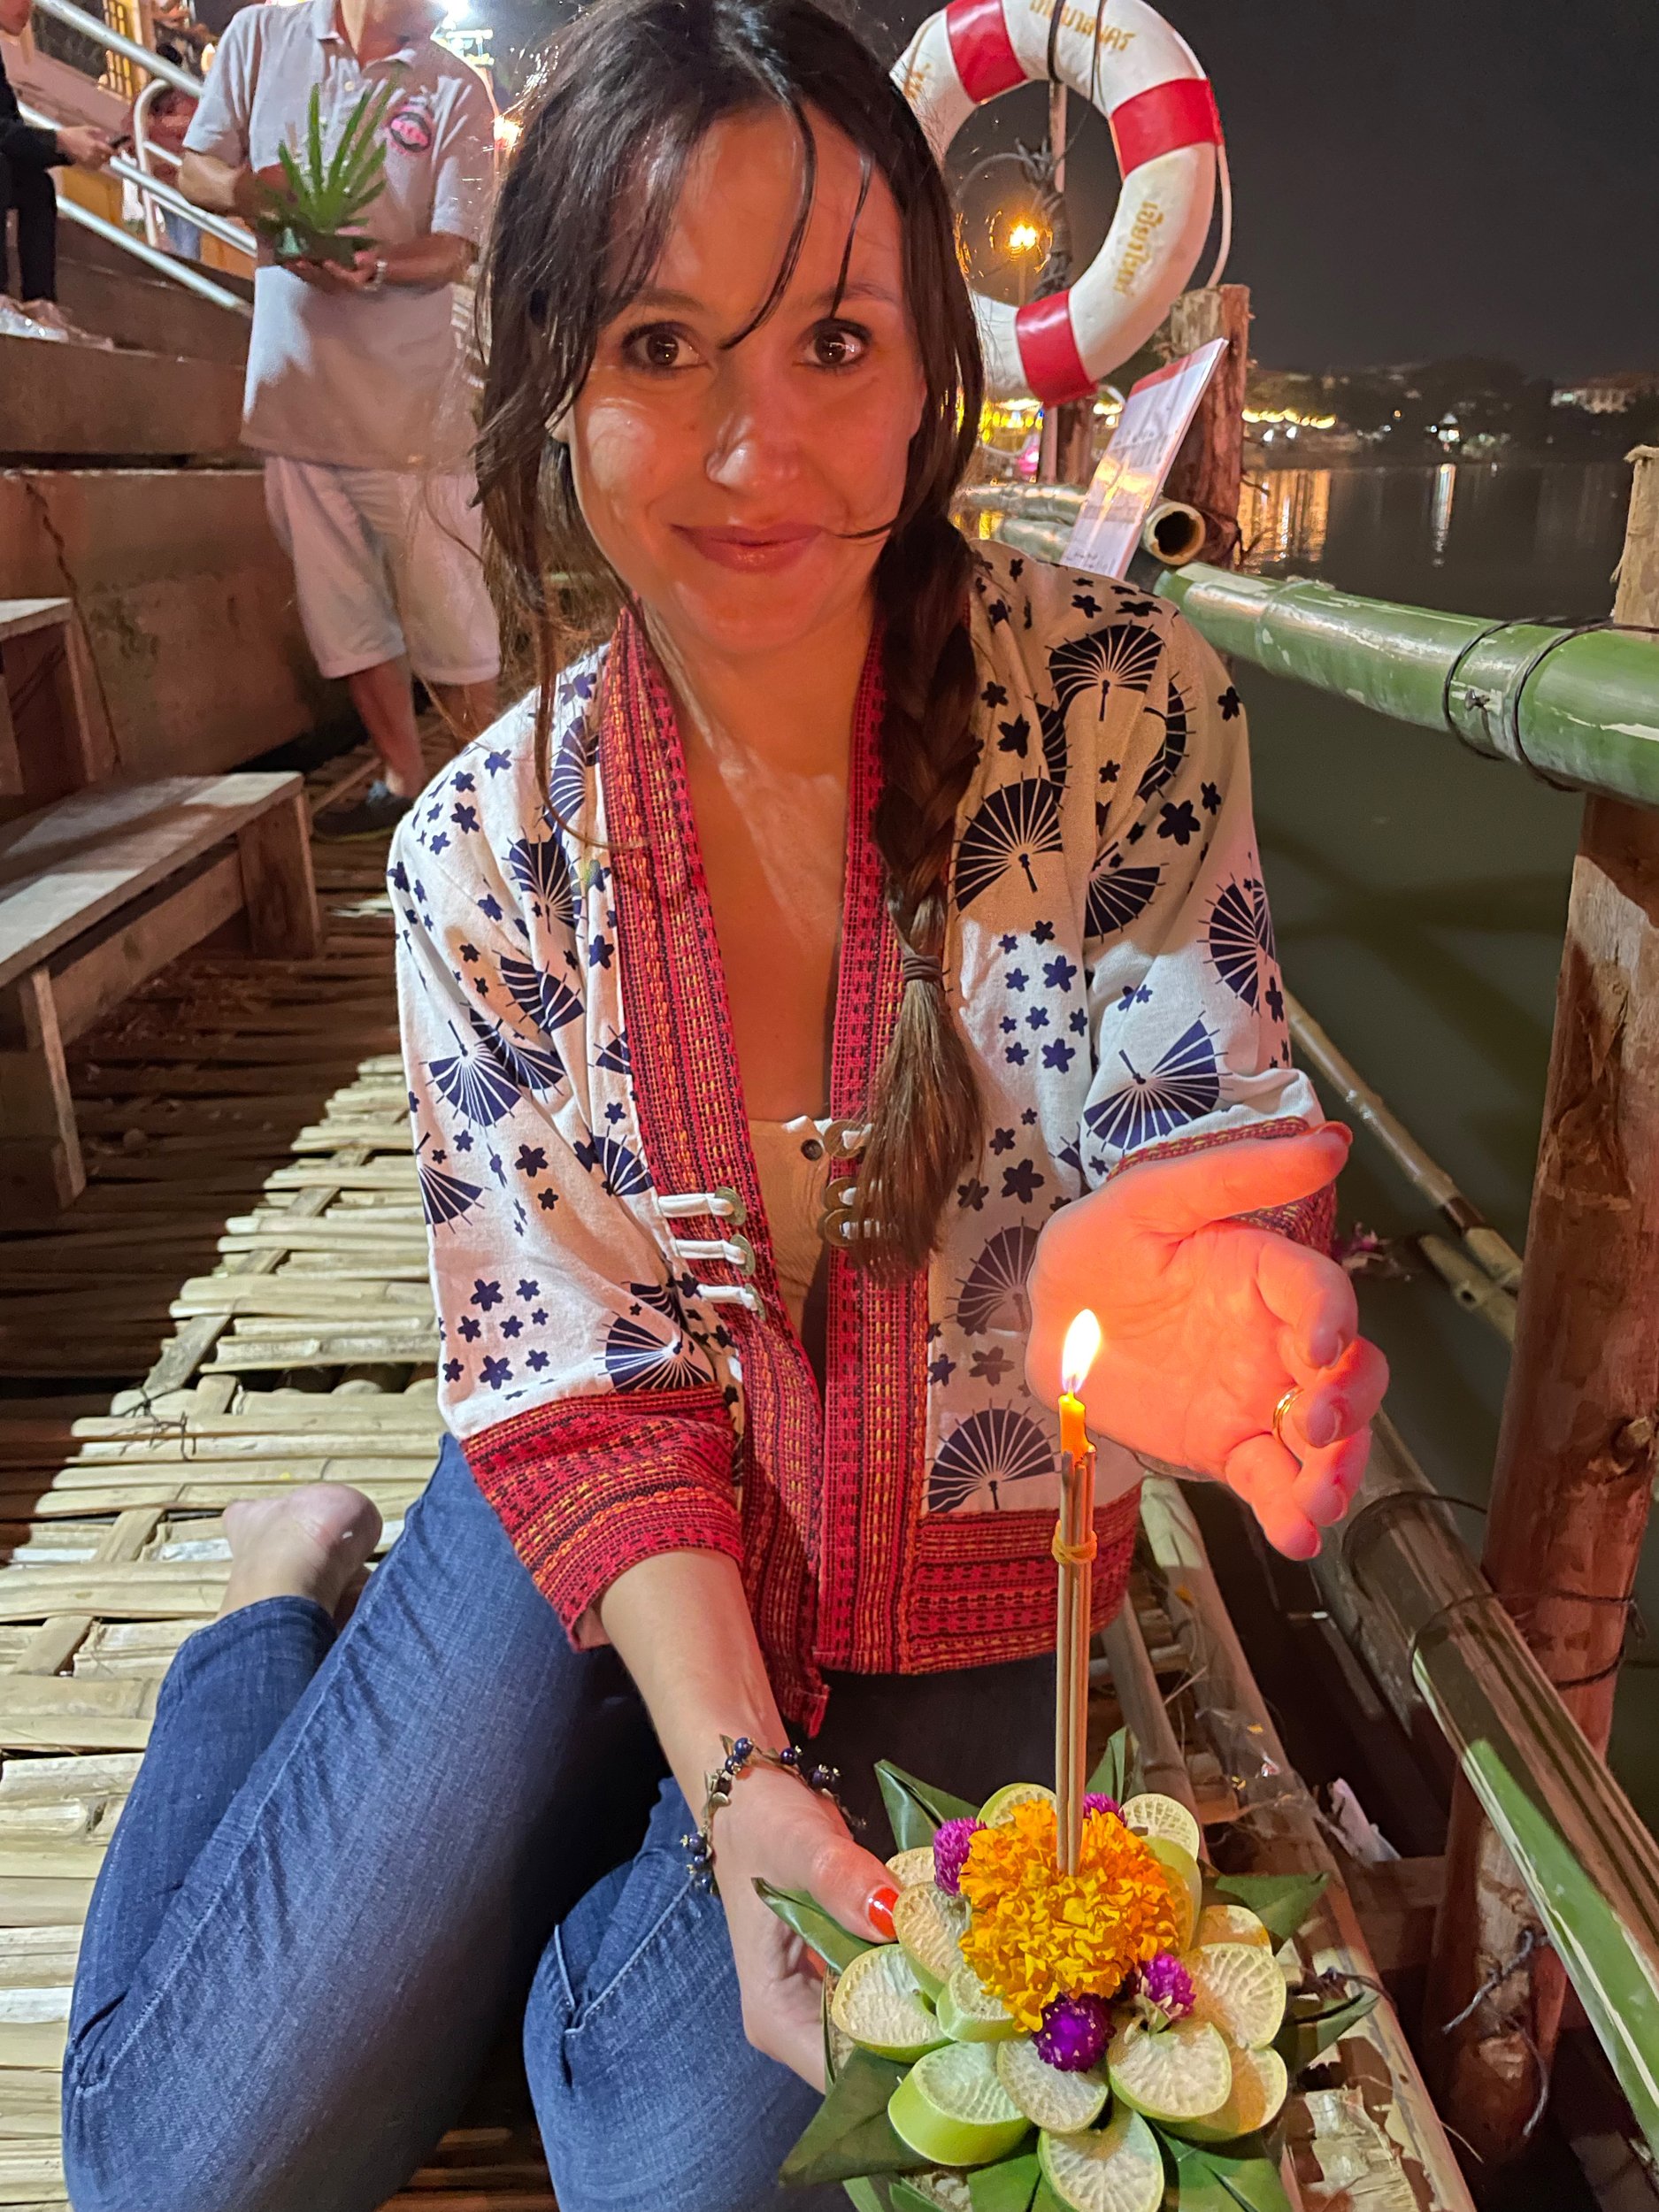 Marta preparing to launch her floating lantern (Krathong) into the river